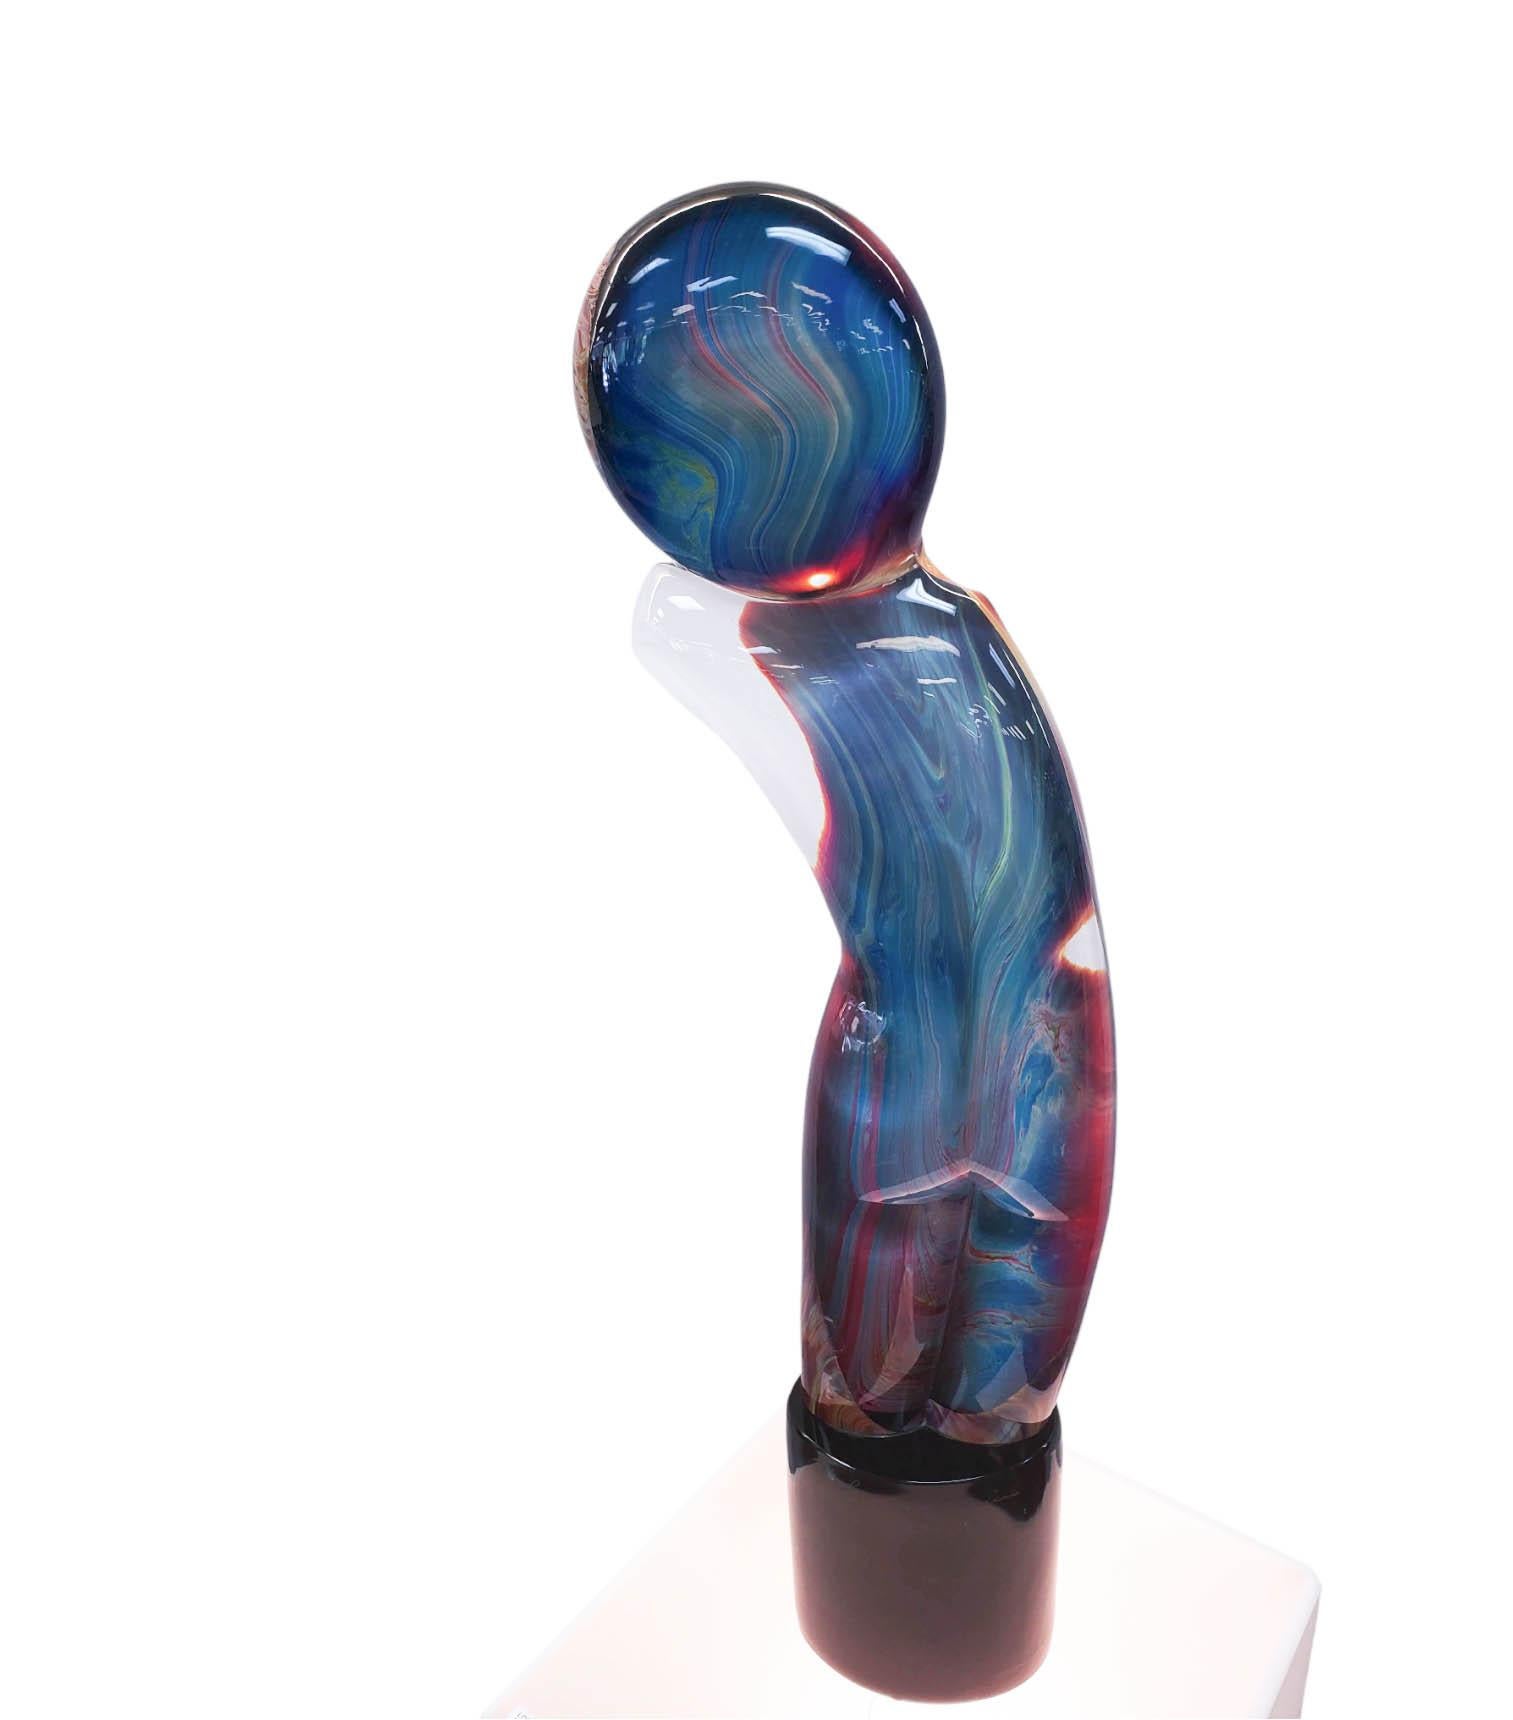 Art glass sculpture by Loredano Rosin (Italian, 1936-1991) portrays a nude figure in hand-polished Calcedonia glass on a base signed by the artist. CIRCA: 1991. The sculpture sits atop a pedestal that can be lit.

DIMENSIONS: sculpture: 31 inches